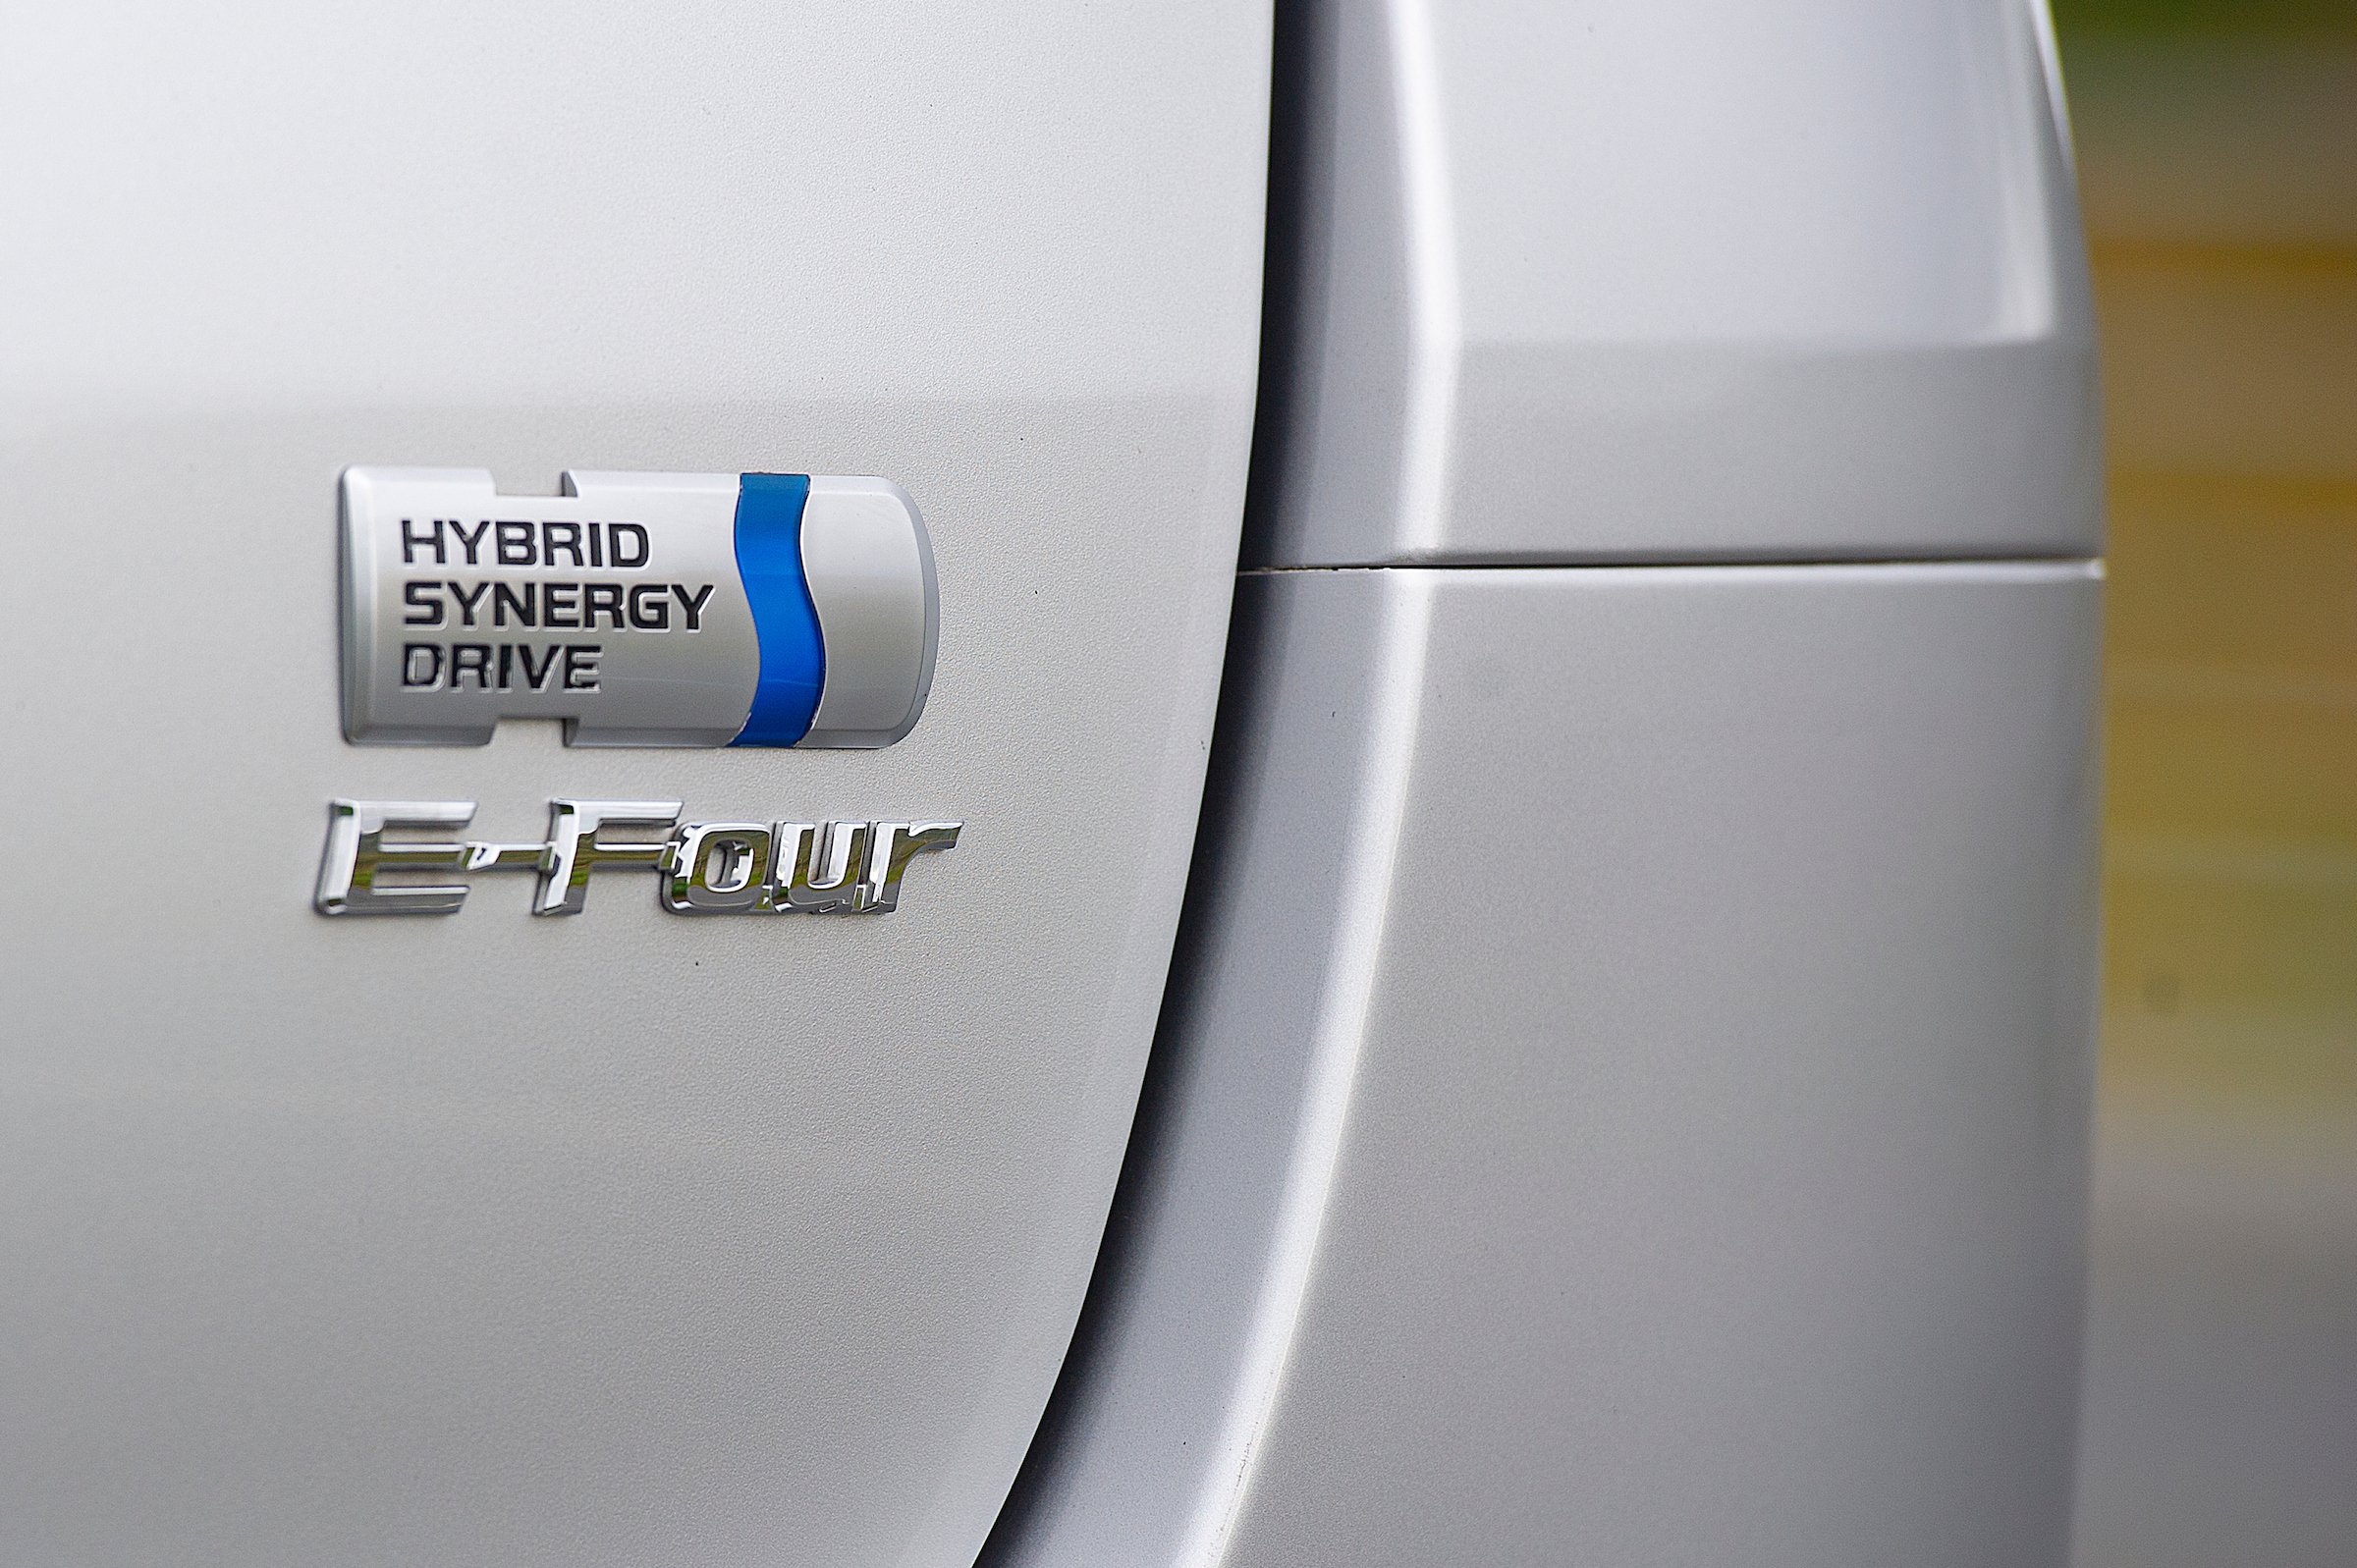 Toyota's Hybrid Synergy Drive is the biggest selling Hybrid in the world